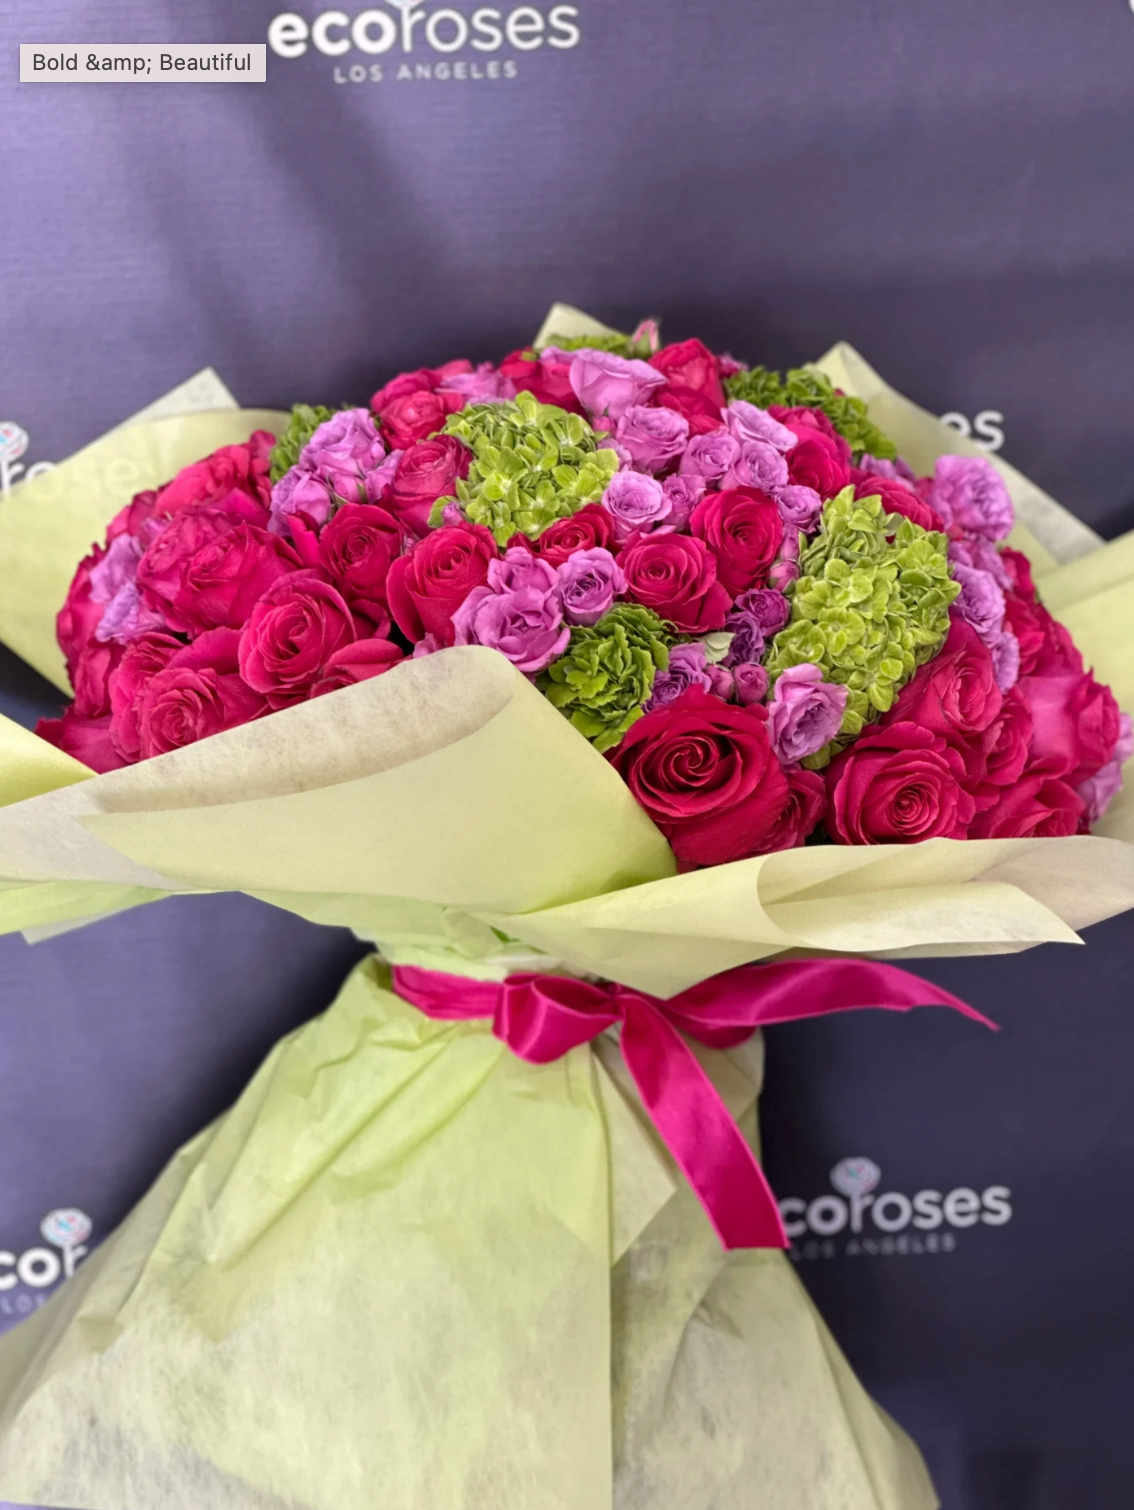 Bold & Beautiful, a stunning bouquet that combines vibrant colors and captivating beauty Glendale Flowers Delivery